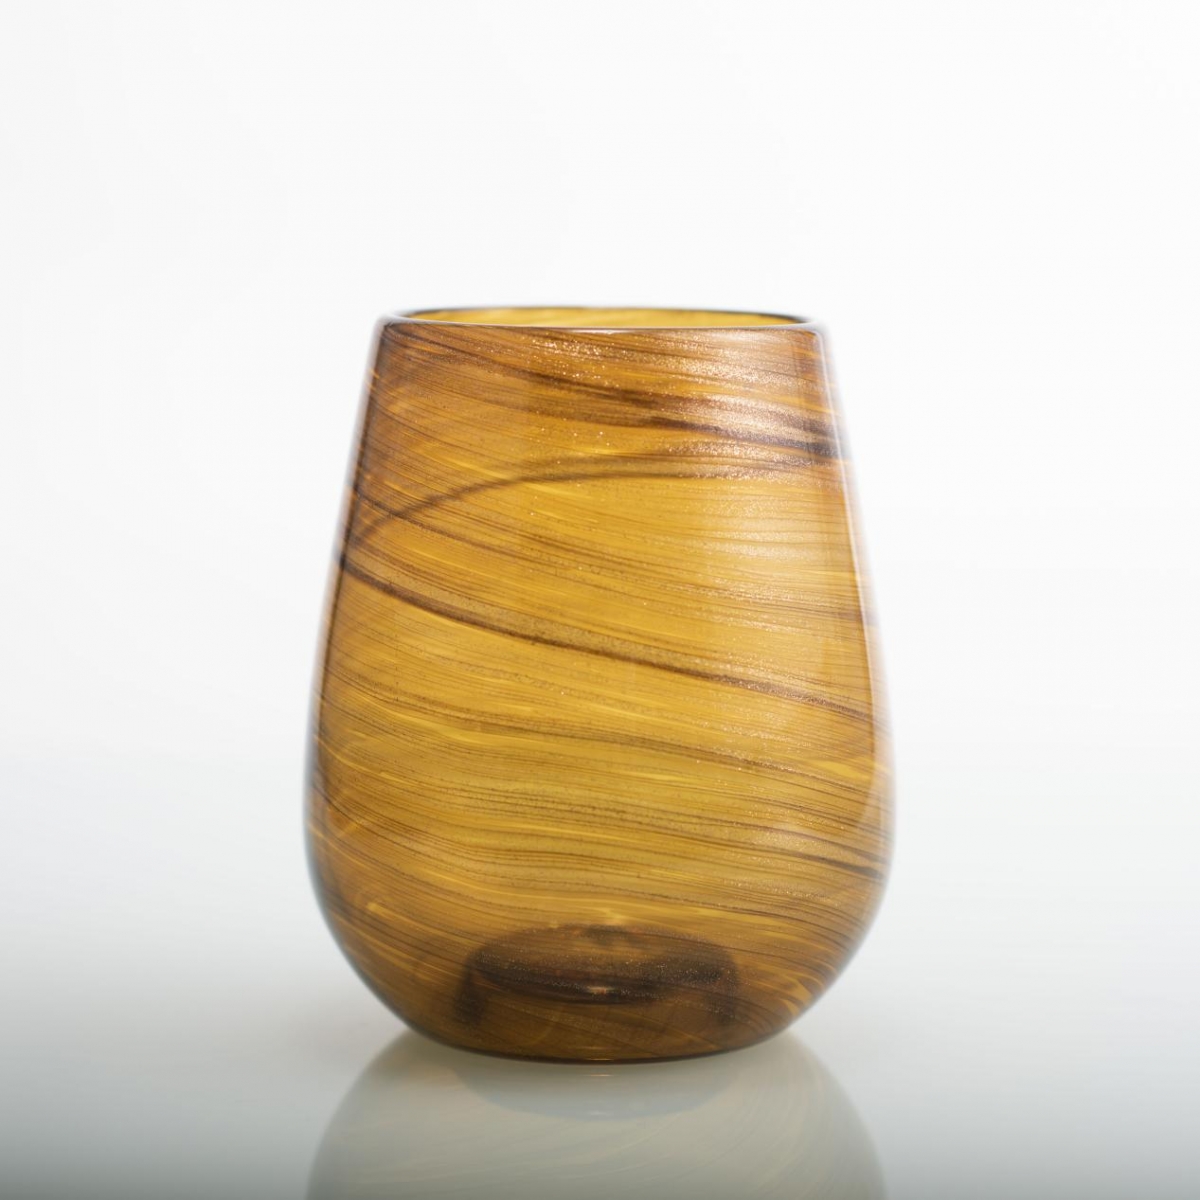 Diagonal Stripes Amber Glazed Glass Candle Holder -Amber Glazed Candle Jar ,Brown Glass Jar ,Brown Glazed Glass Vase ,China Factory ,Price-HOWCANDLE-Candles,Scented Candles,Aromatherapy Candles,Soy Candles,Vegan Candles,Jar Candles,Pillar Candles,Candle Gift Sets,Essential Oils,Reed Diffuser,Candle Holder,